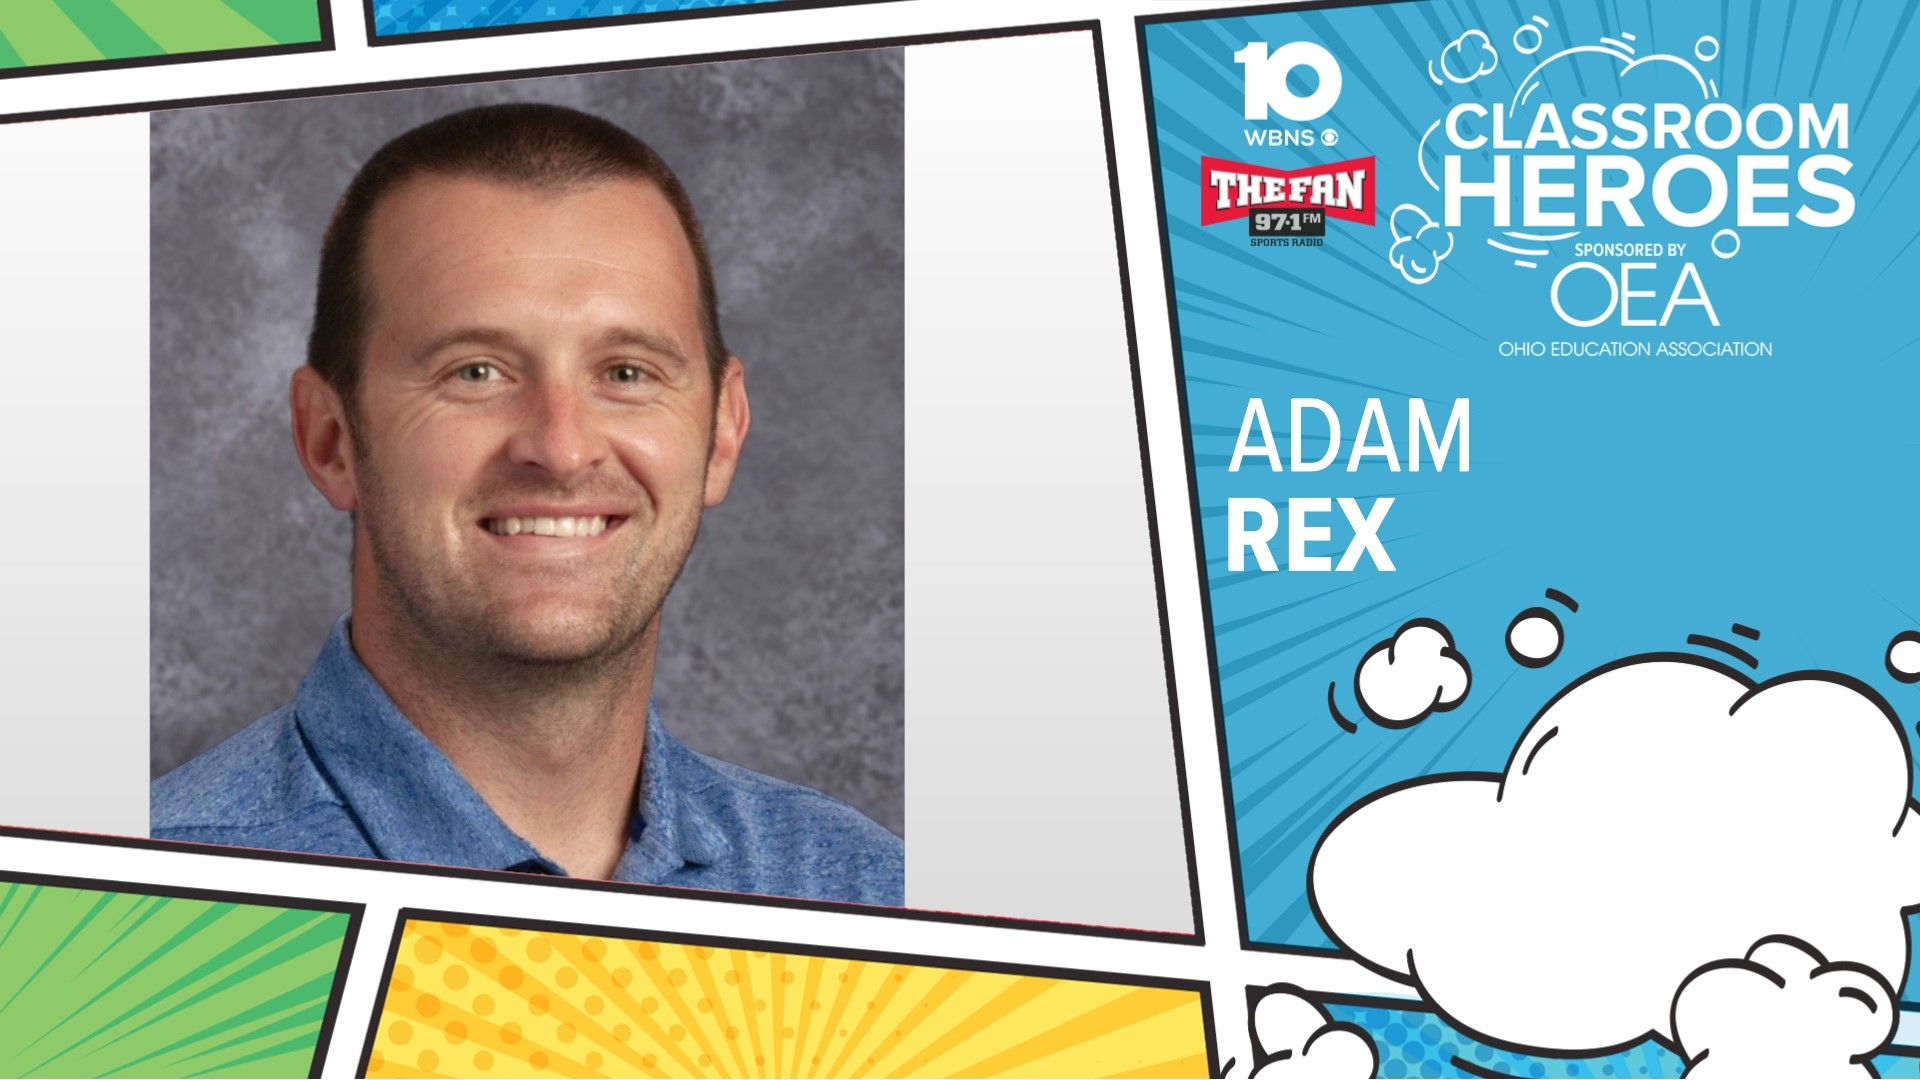 Adam Rex wanted to be a doctor. He says he was pre-med until he ran into organic chemistry. It was then that his life turned onto a different path.